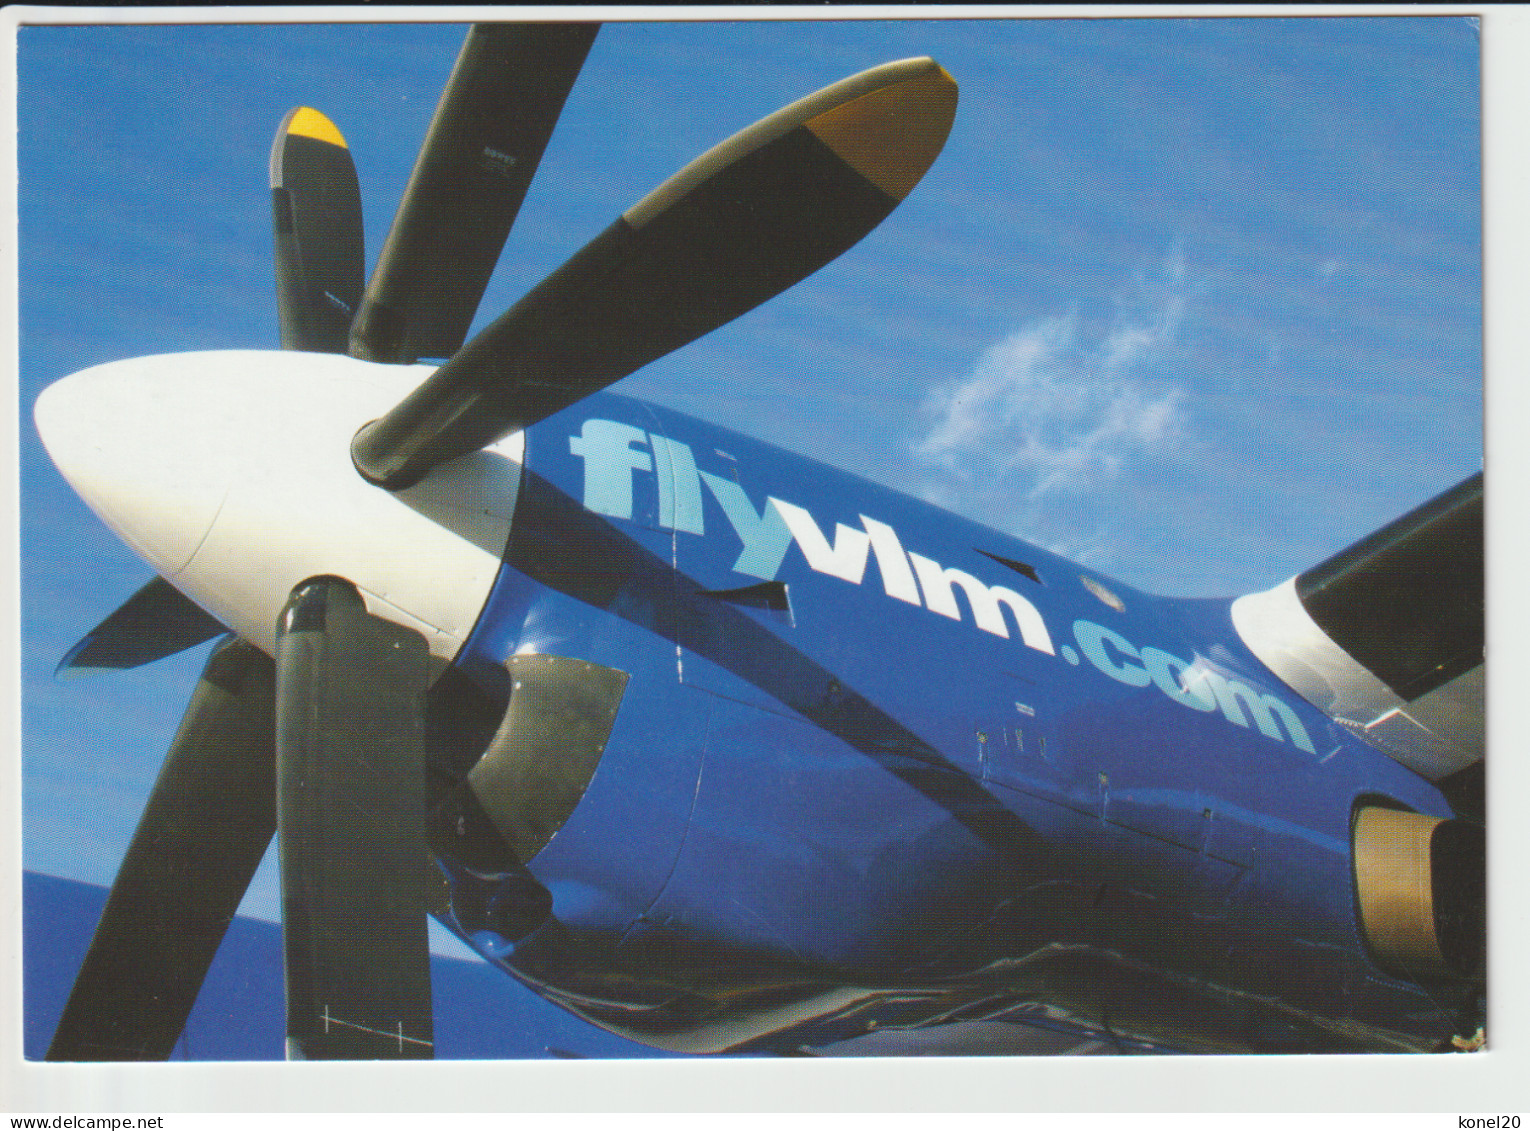 Pc VLM Airlines Fokker F-50 Aircraft - 1919-1938: Between Wars